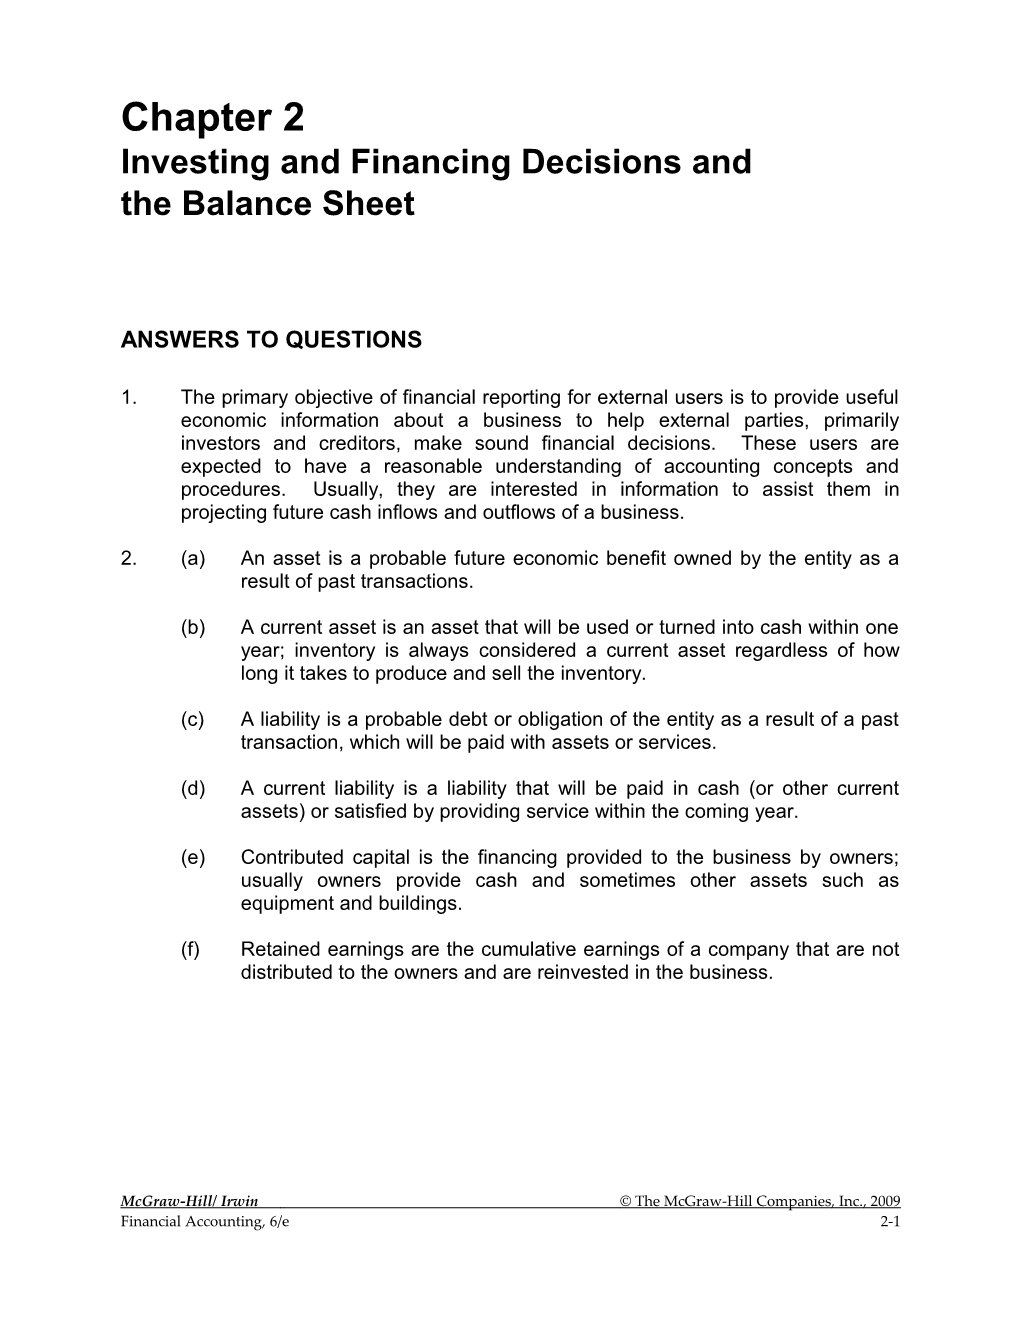 Investing and Financing Decisions and the Balance Sheet